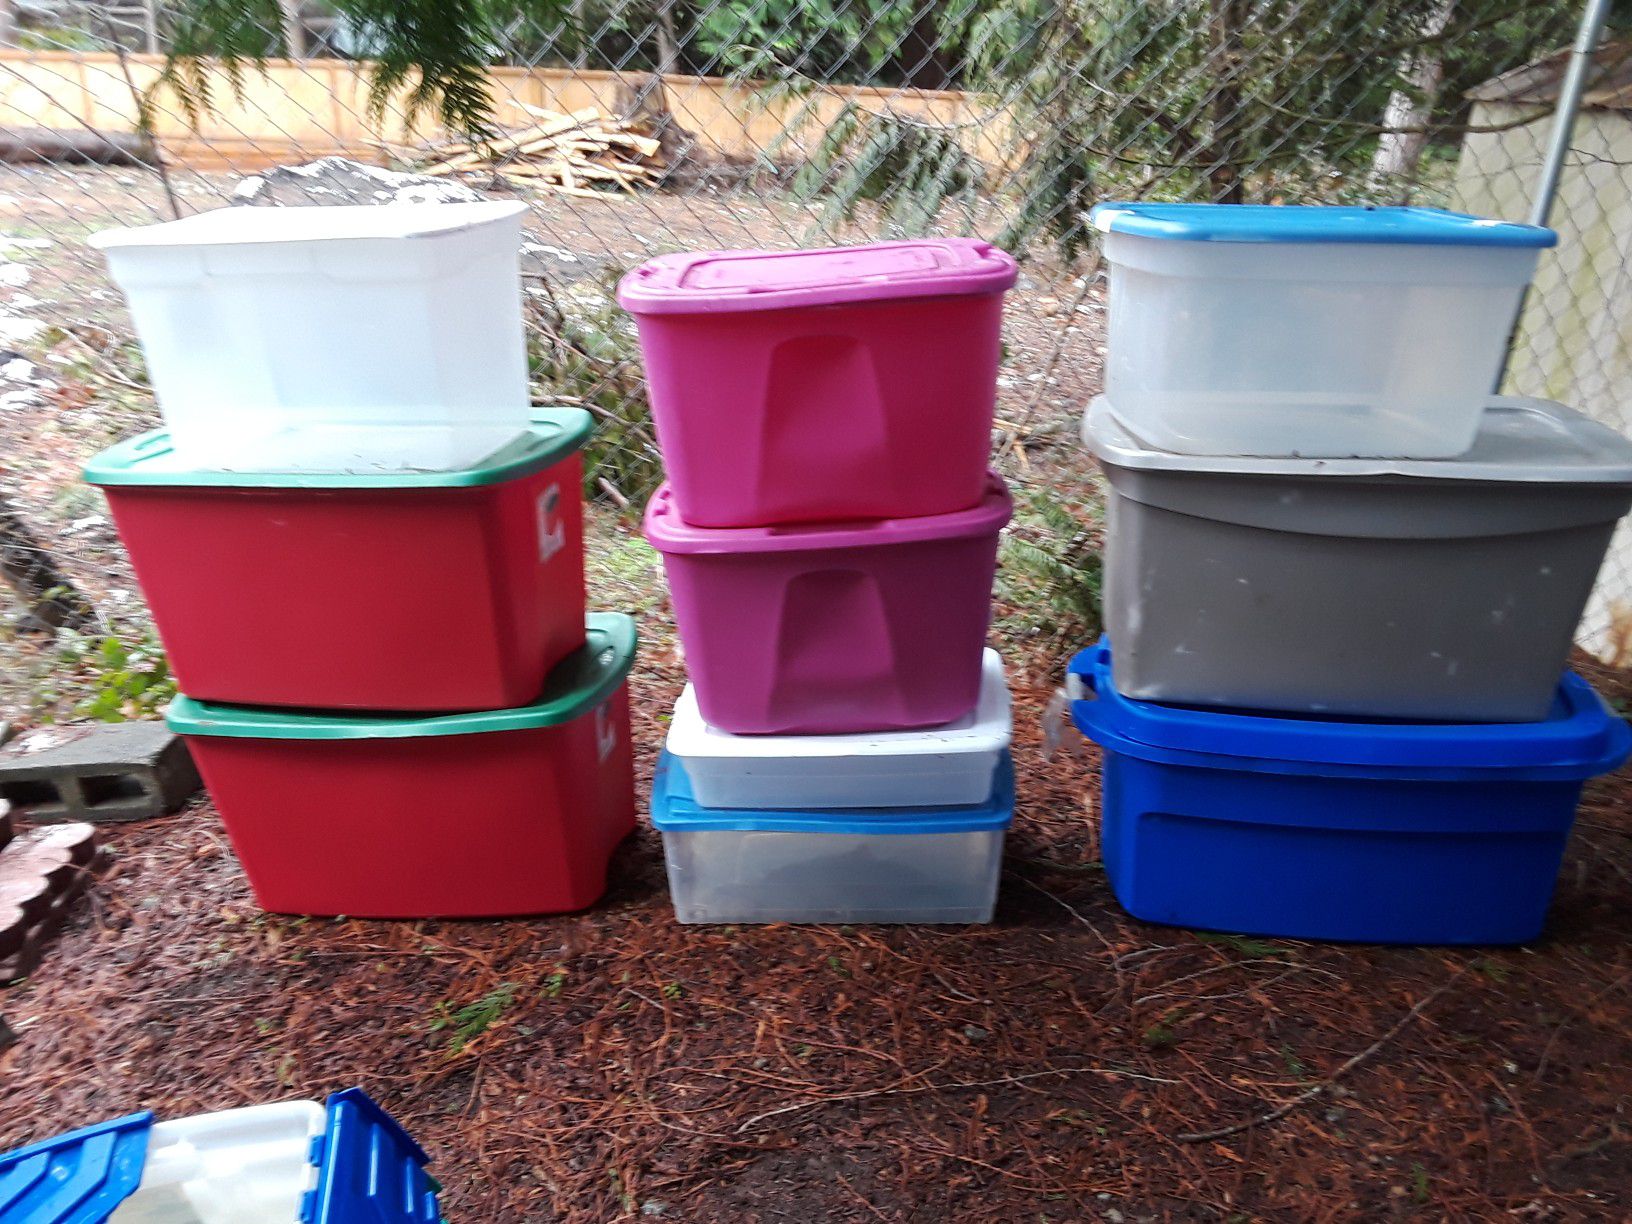 10 plastic storage containers/bins